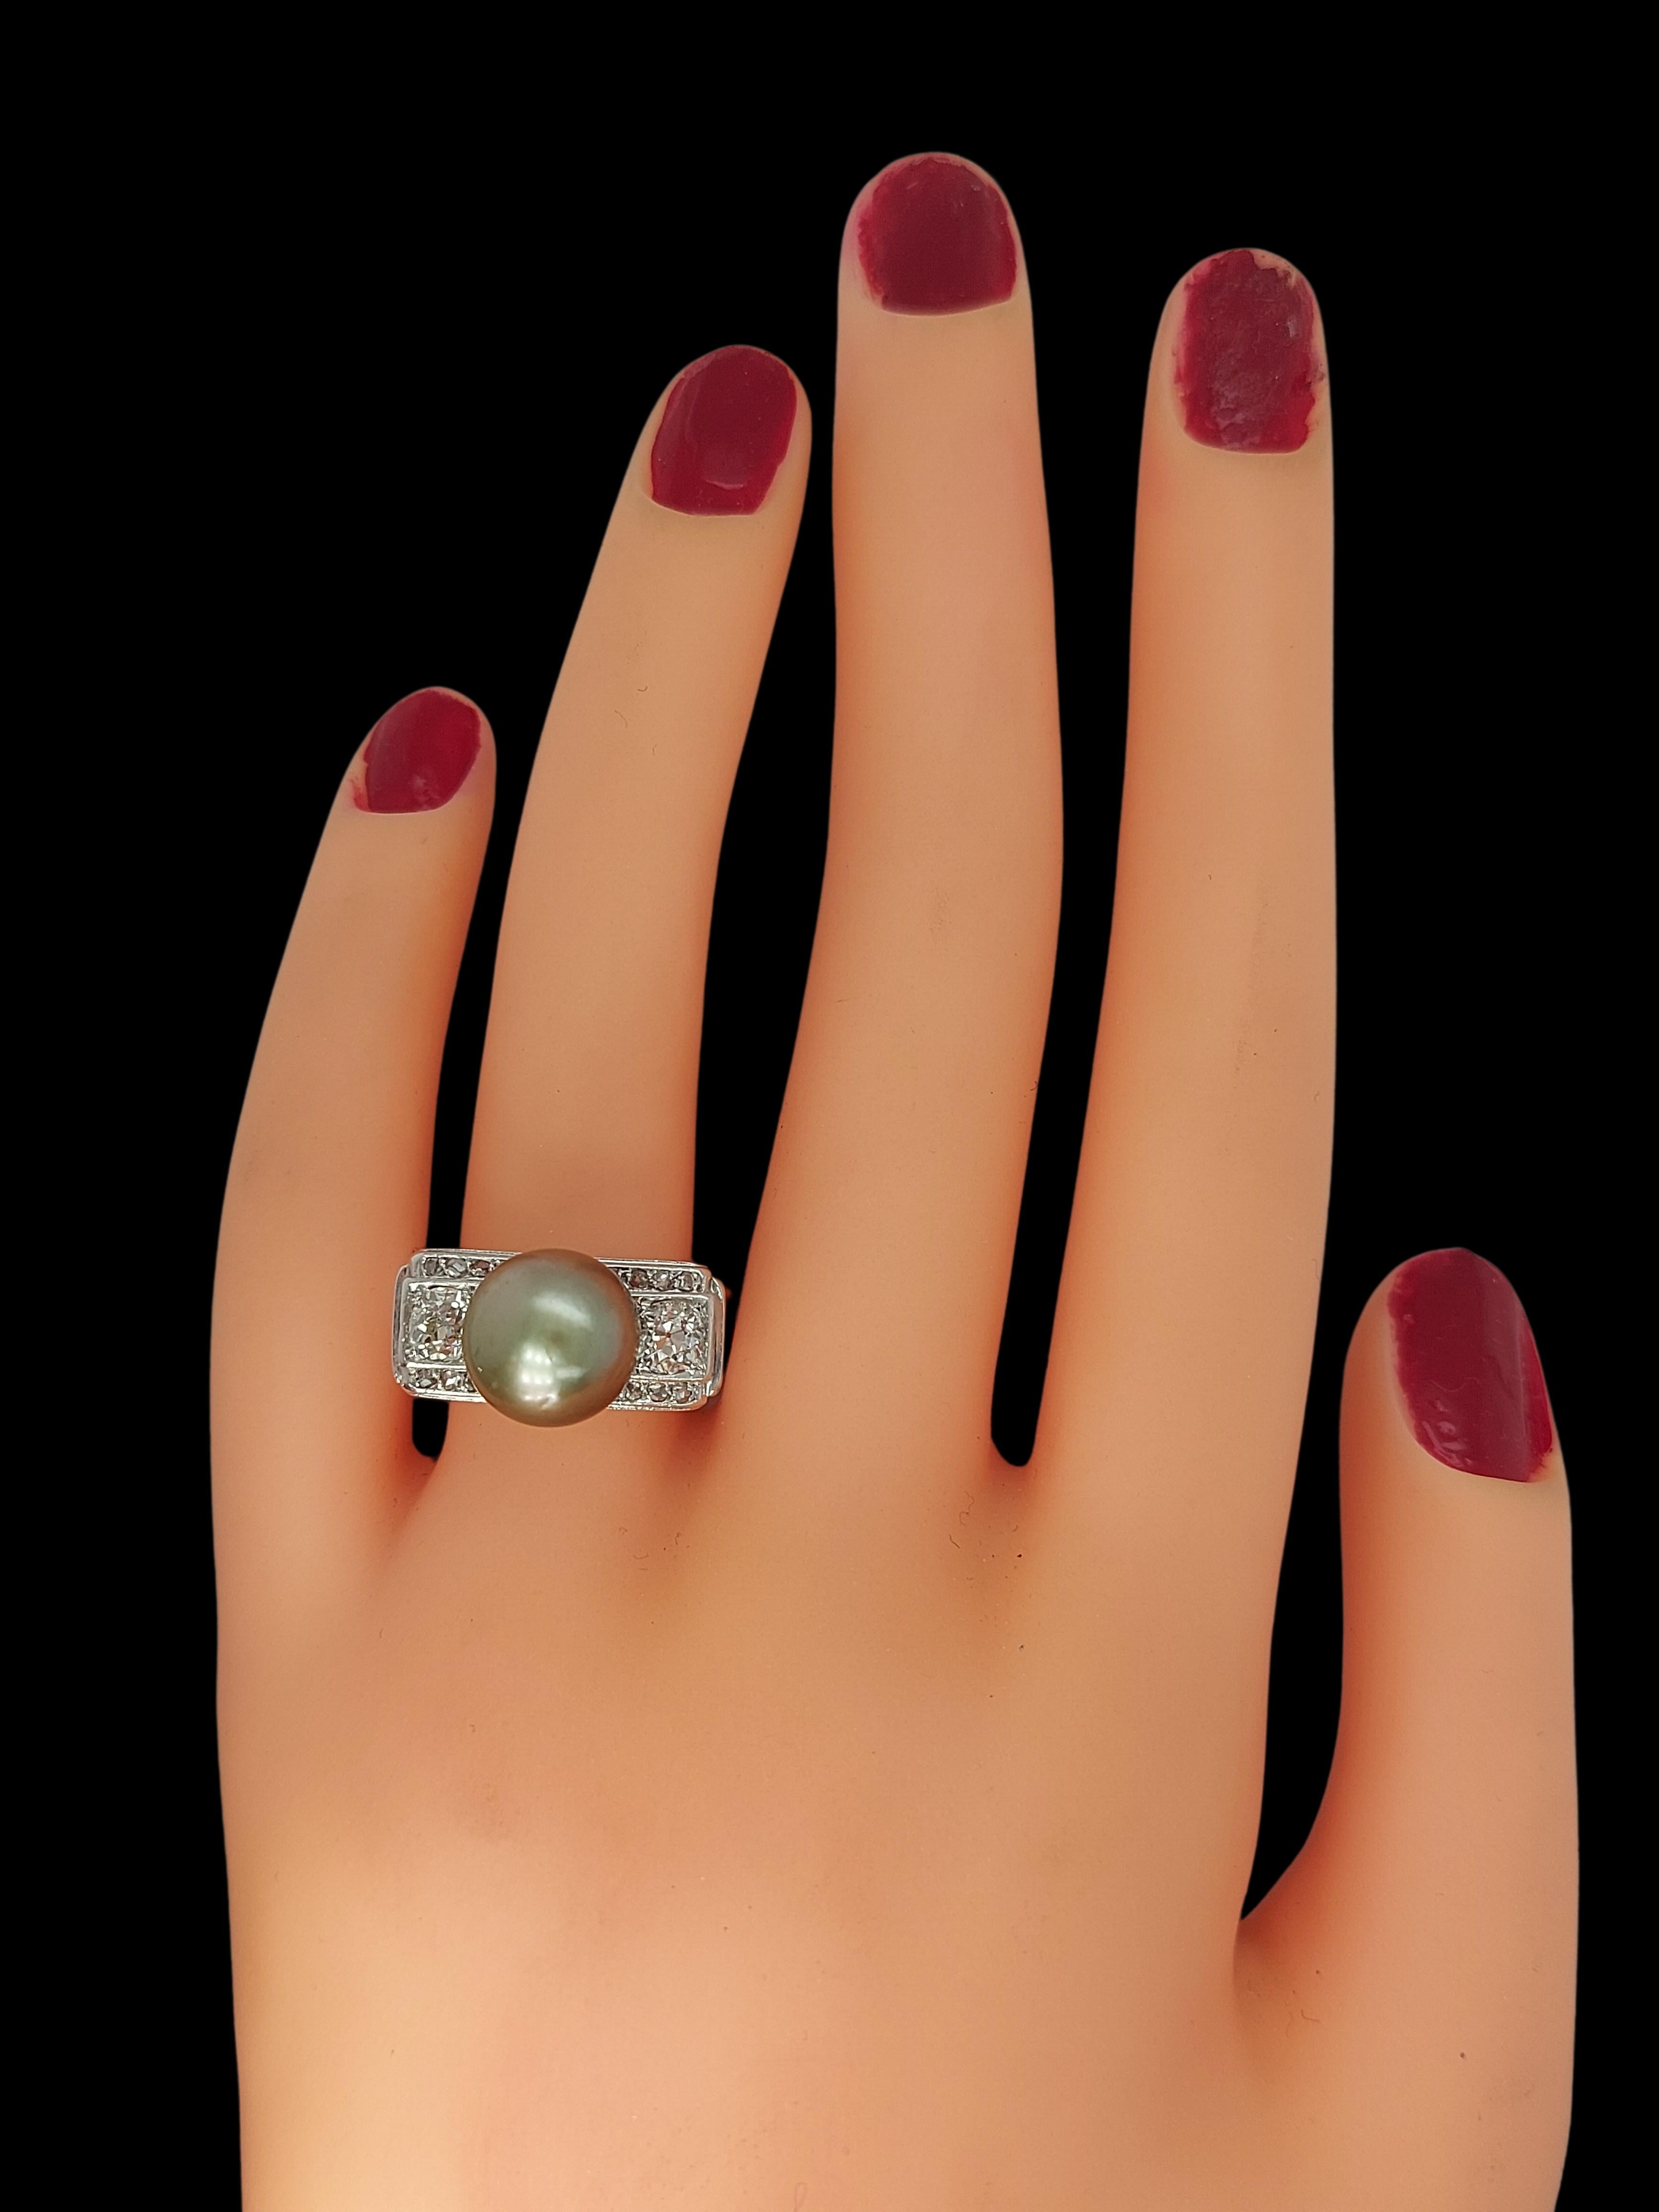 18kt White Gold Ring with Green Tahiti Pearl and 0.5ct Old Mine Cut Diamonds 3